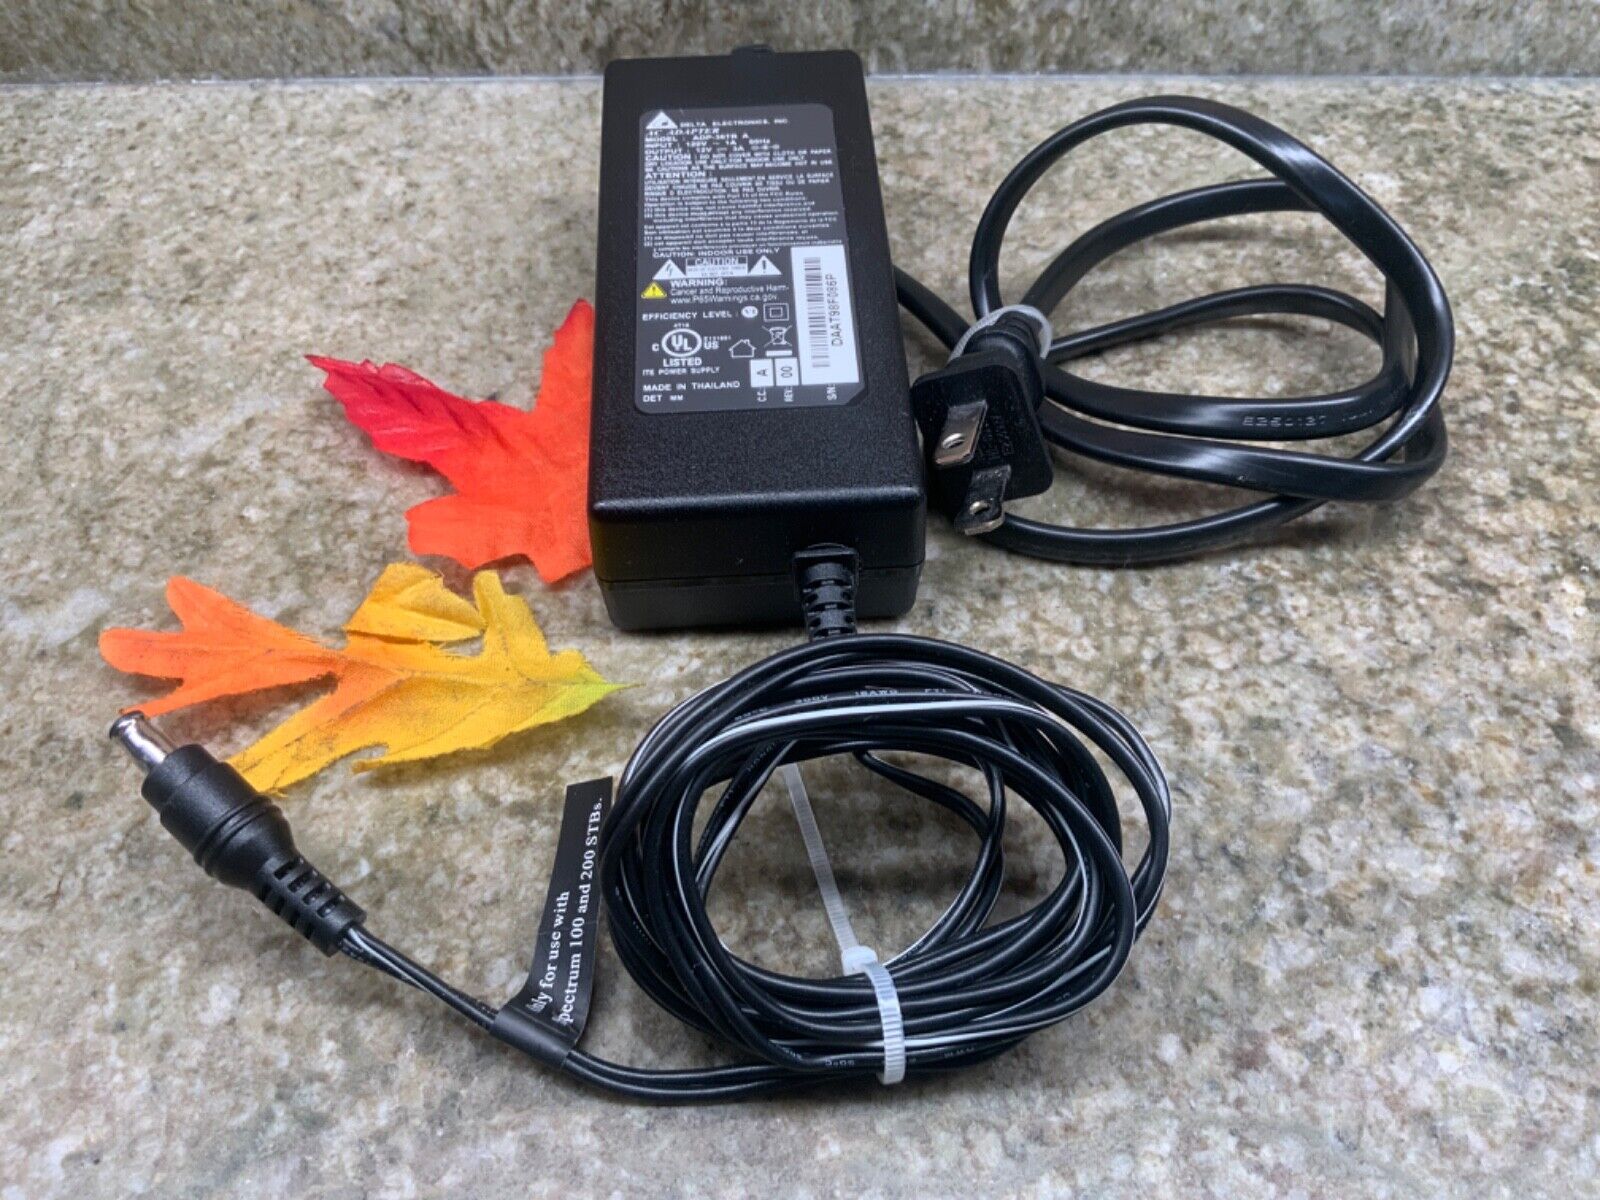 *Brand NEW* Genuine Delta Electronics ADP-36TR-A ADP-36TRA 12V 3A 120V AC Adapter Power Supply